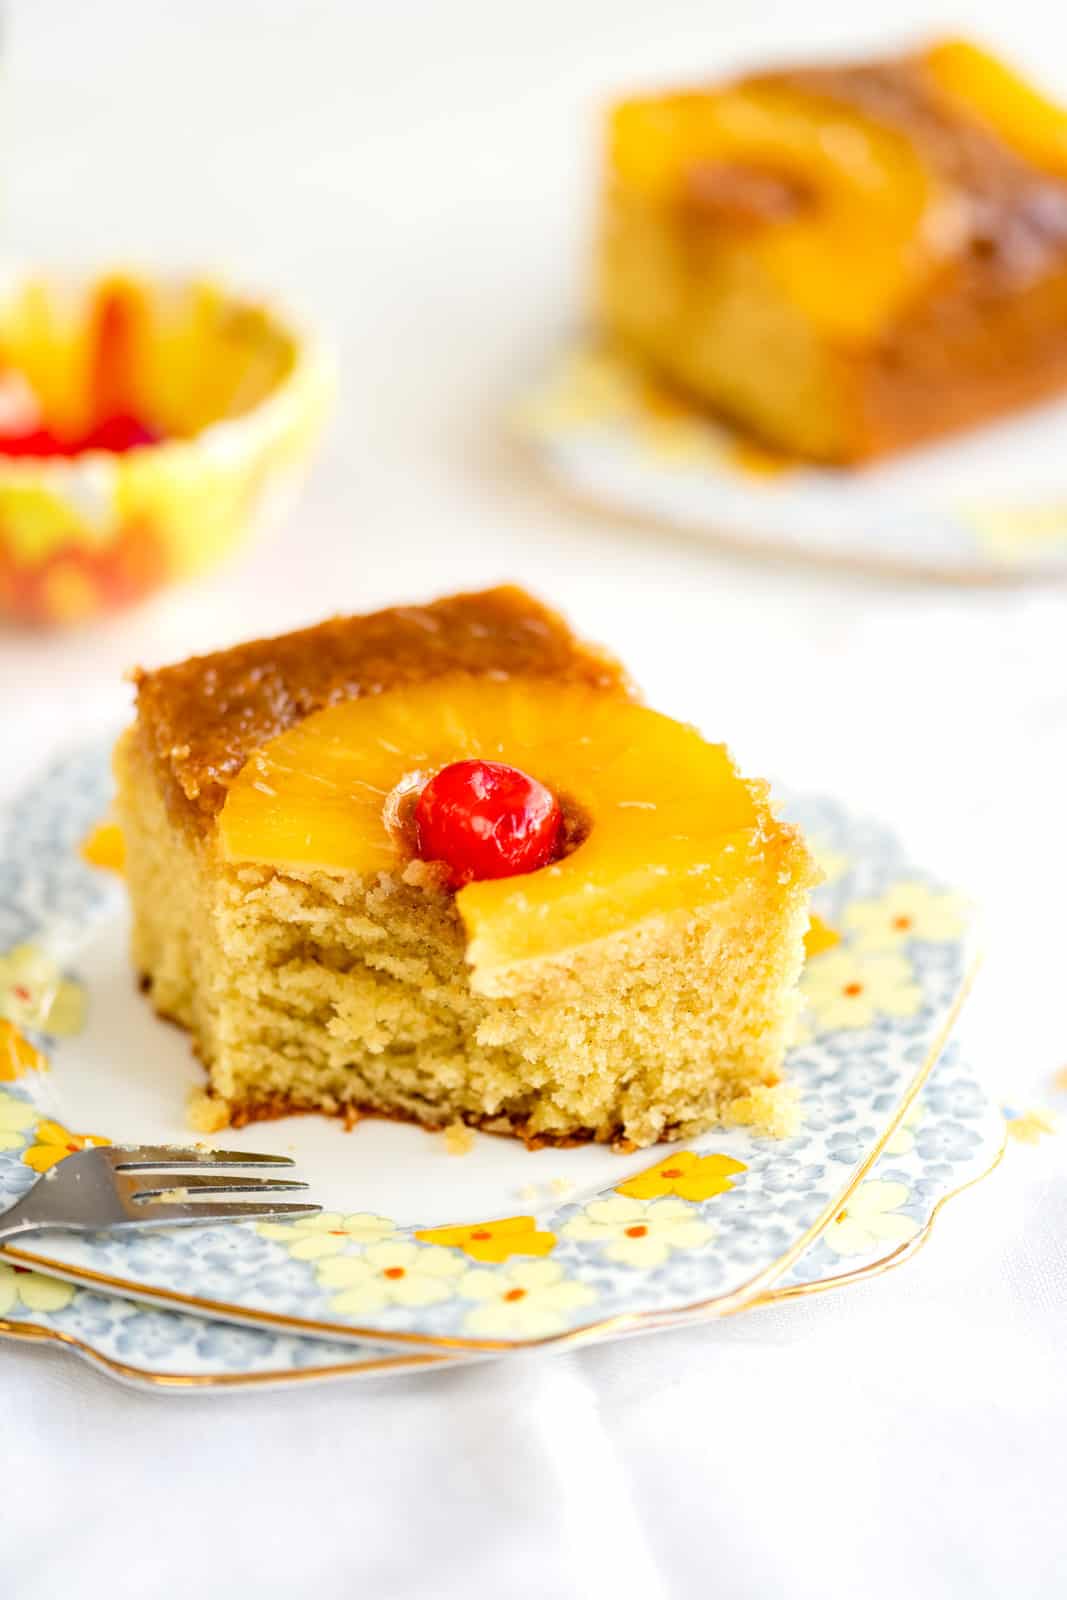 Slice of Pineapple Upside Down Cake on a floral plate with bite taken out